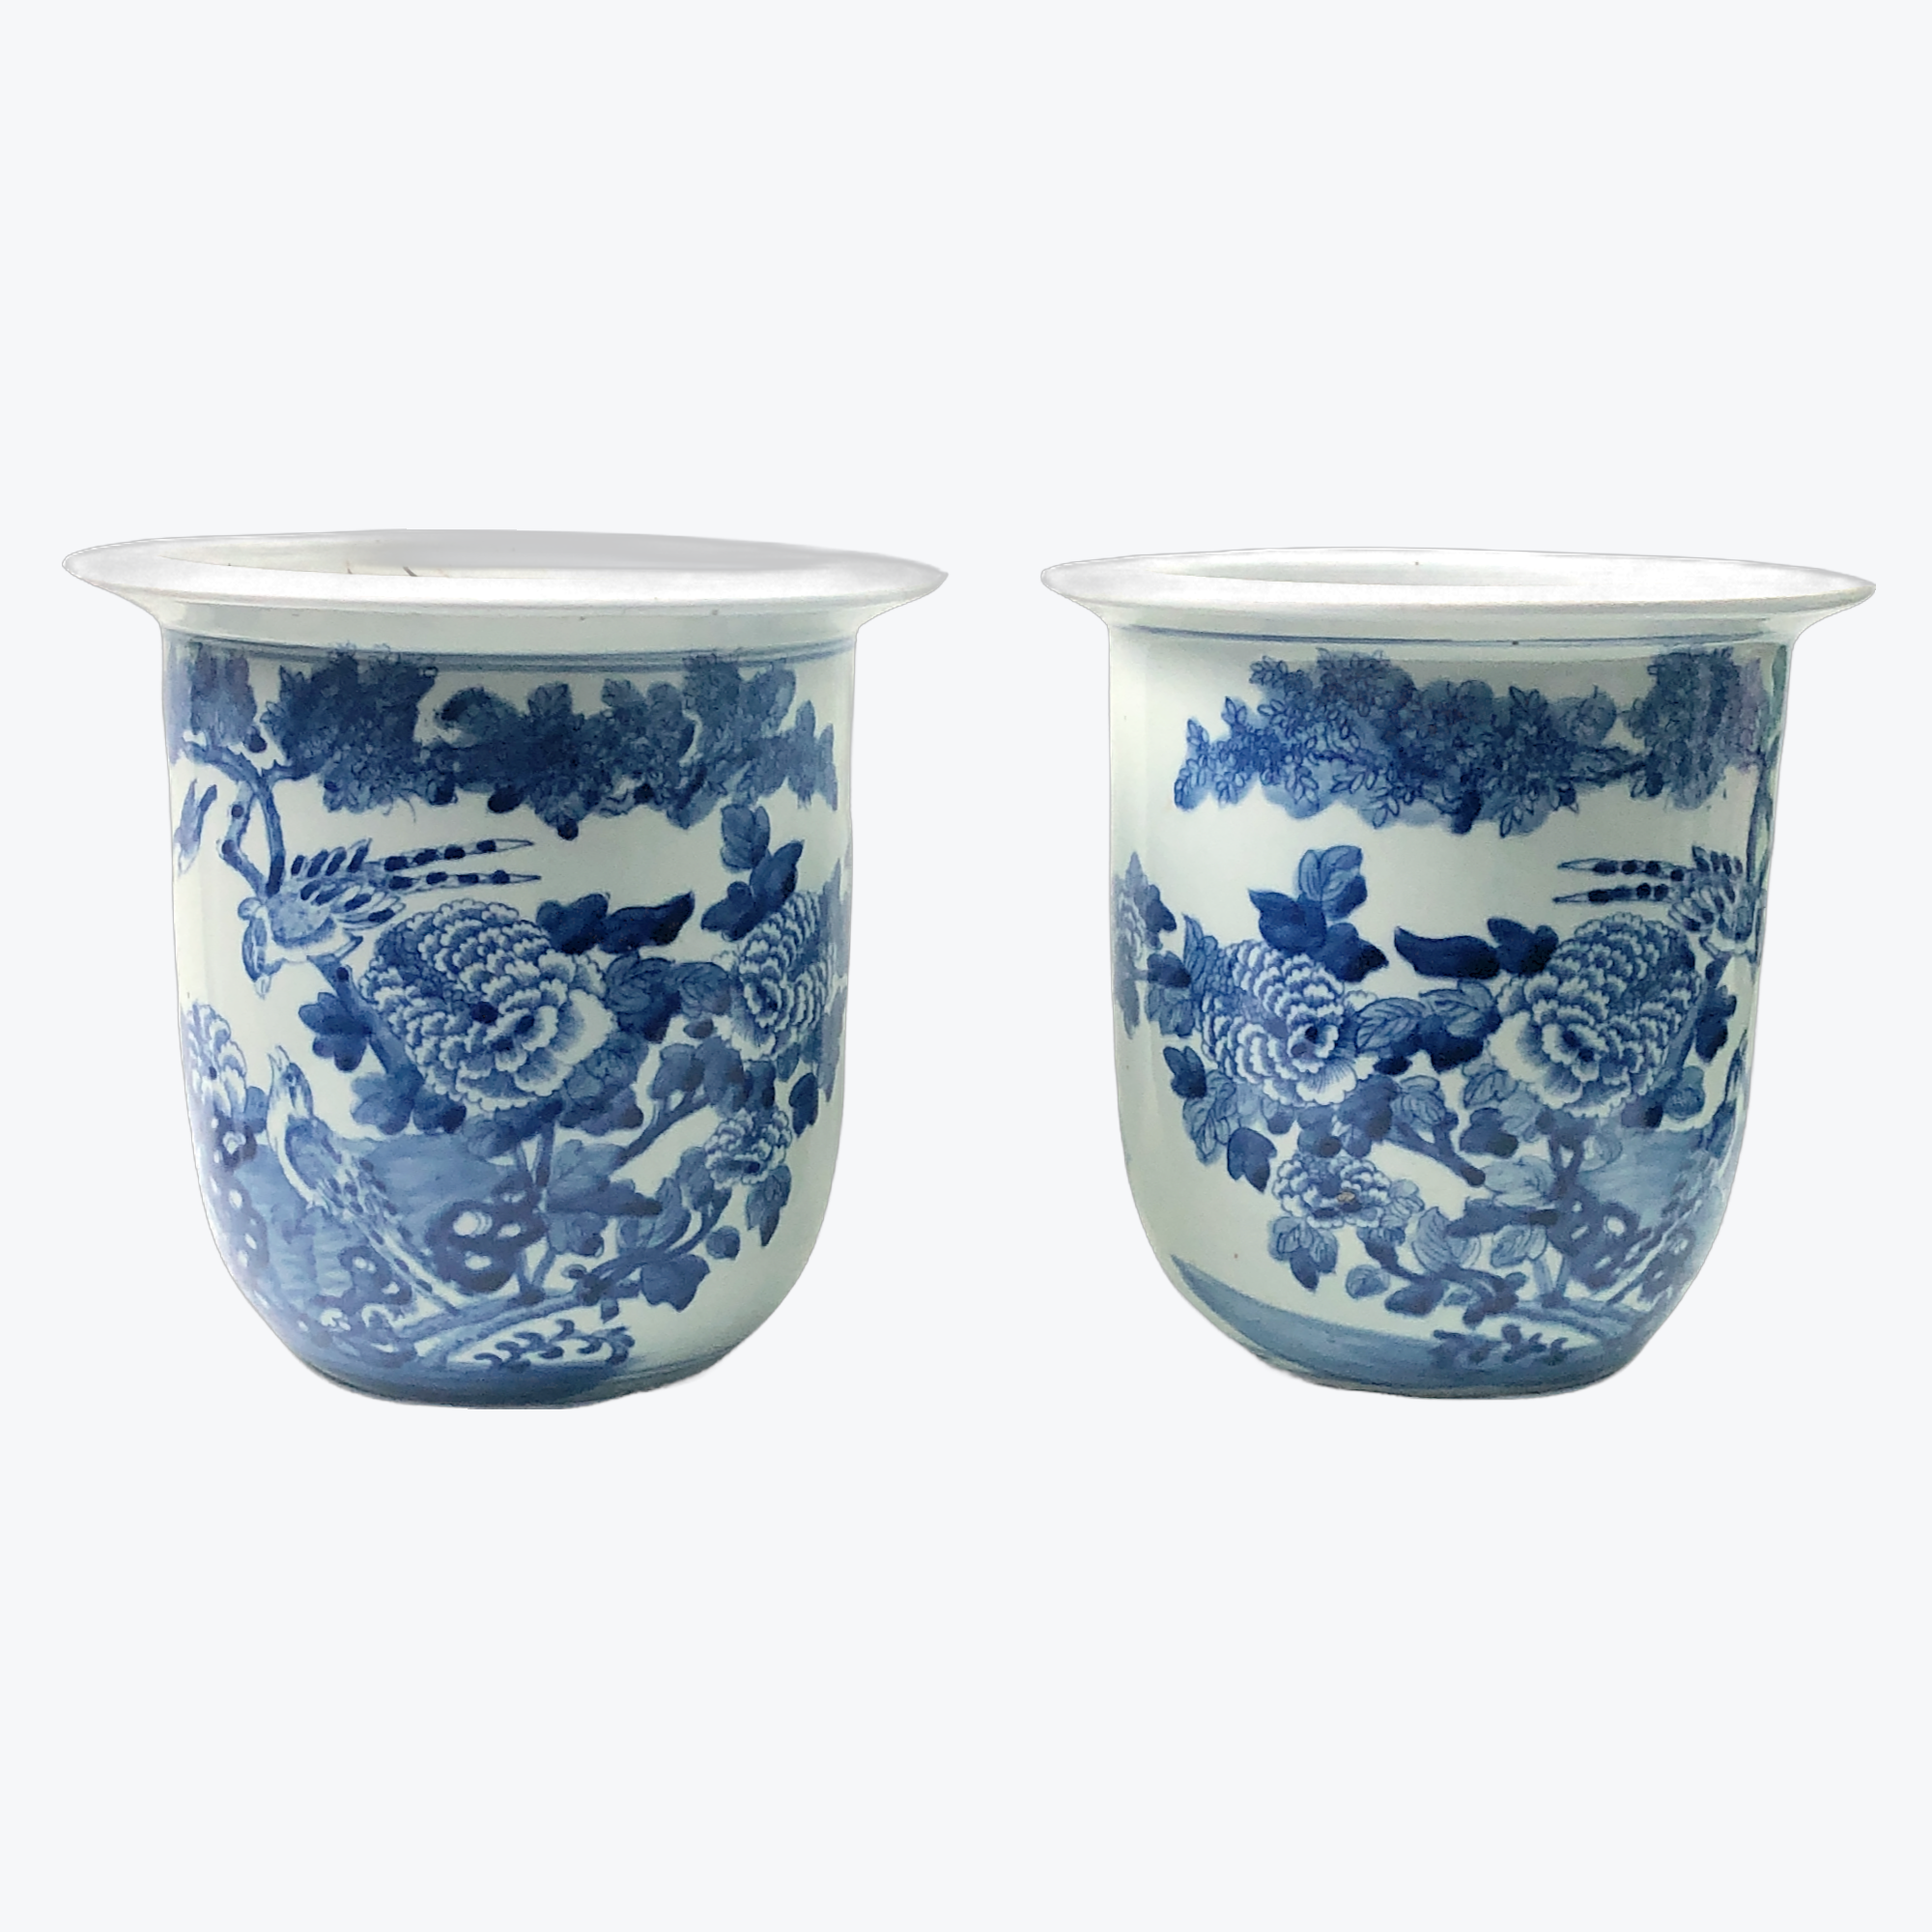 Chinese pair of blue and white birds and flowers themed jardinieres, early 20th century,21.5cm high